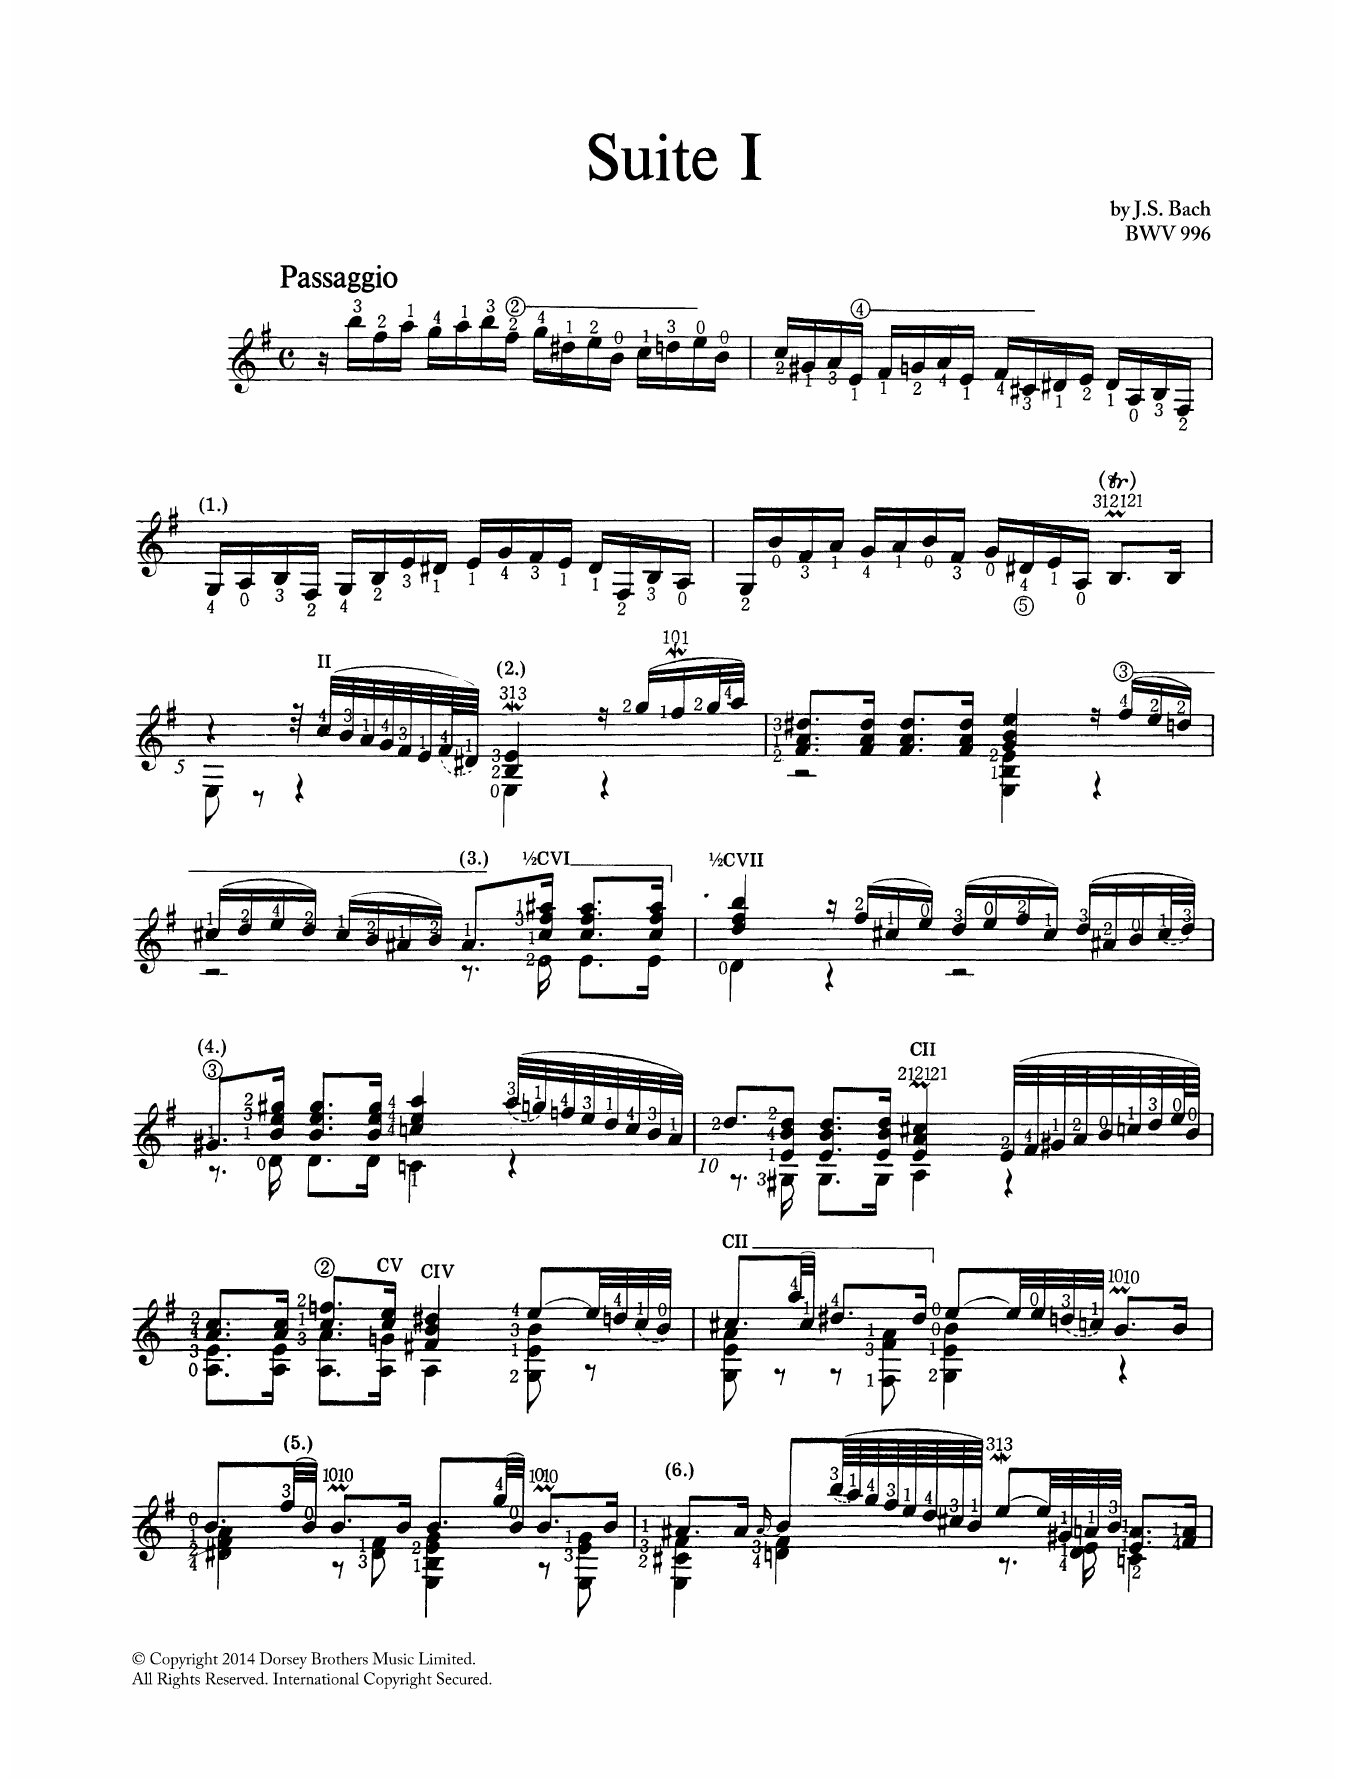 Download J.S. Bach Suite In E Minor BWV 996 Sheet Music